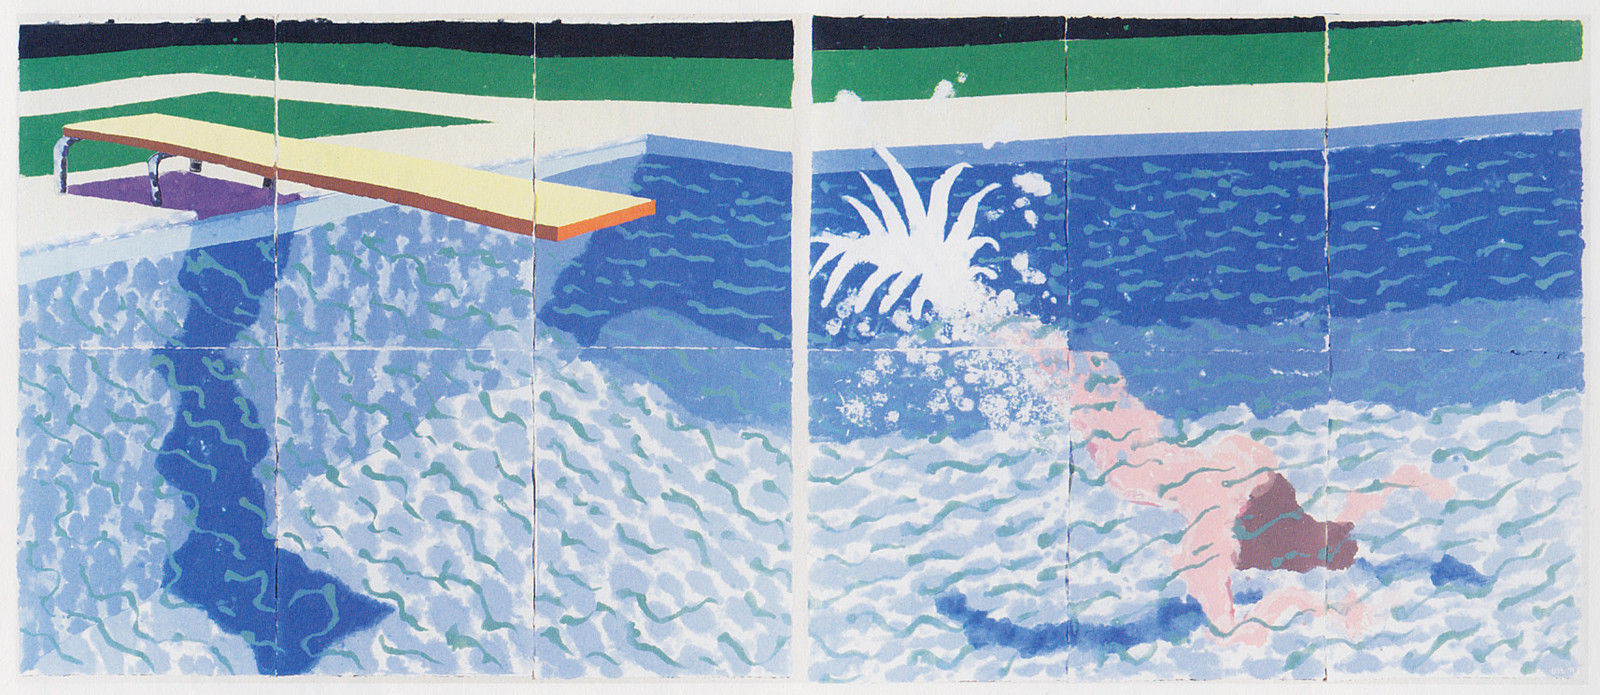 How to Paint A Diver (Paper Pool 18) by David Hockney